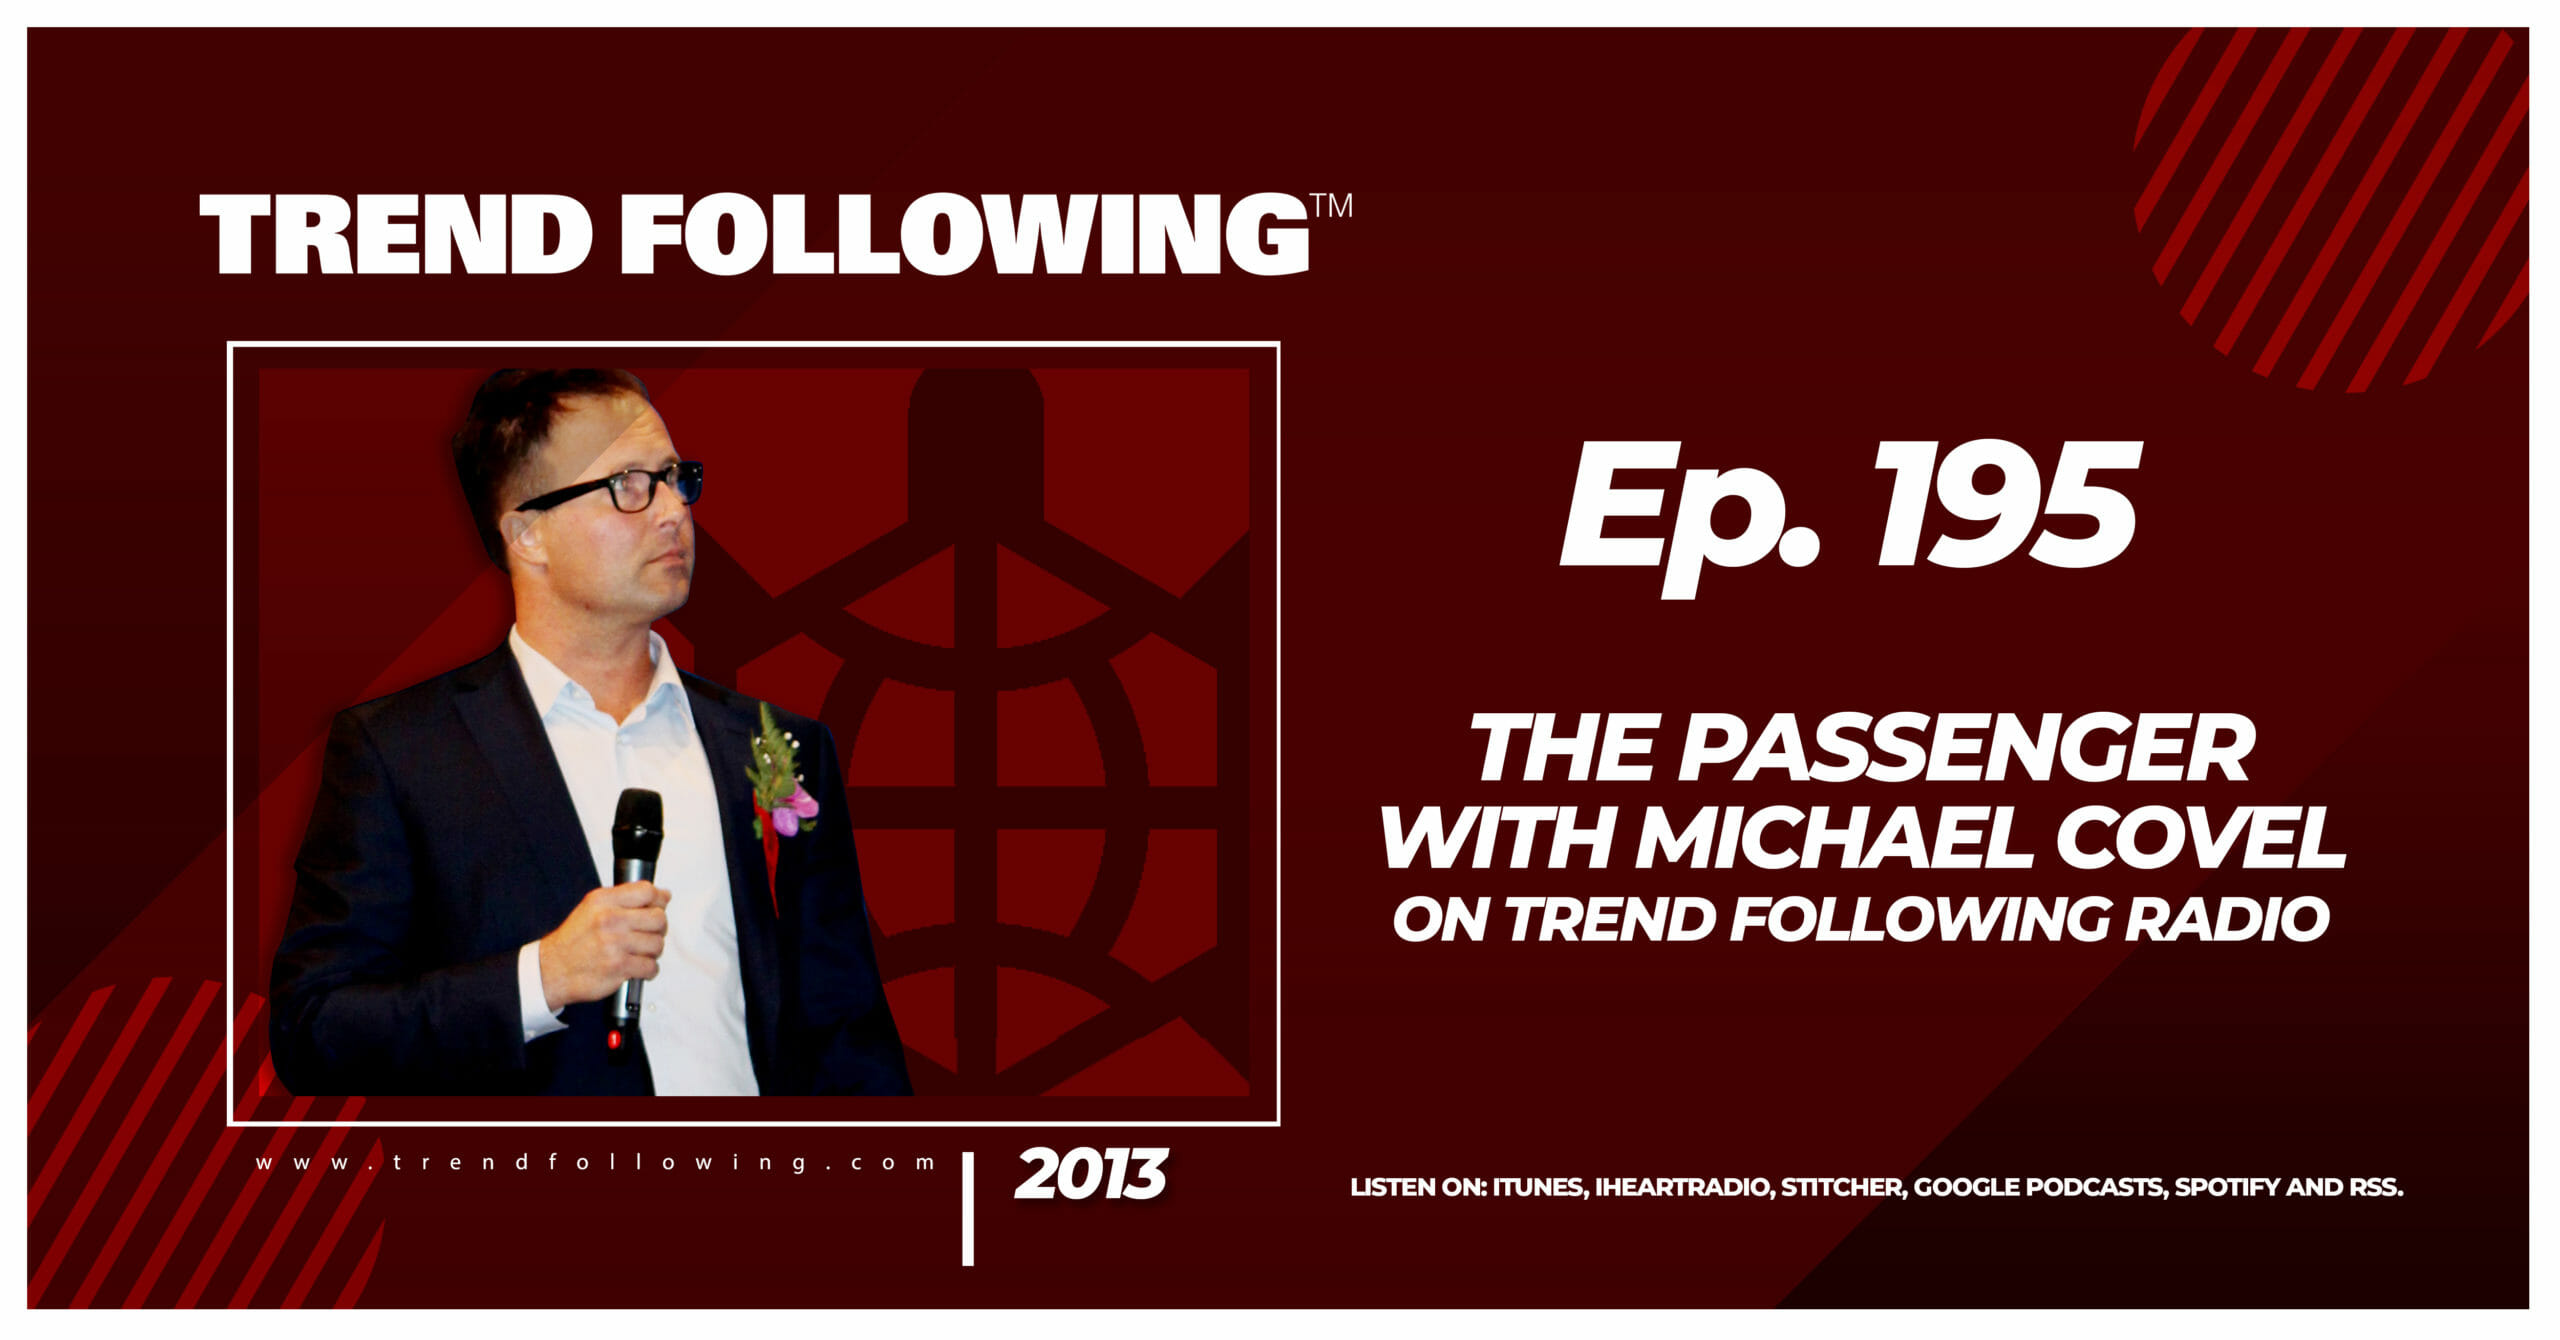 The Passenger with Michael Covel on Trend Following Radio